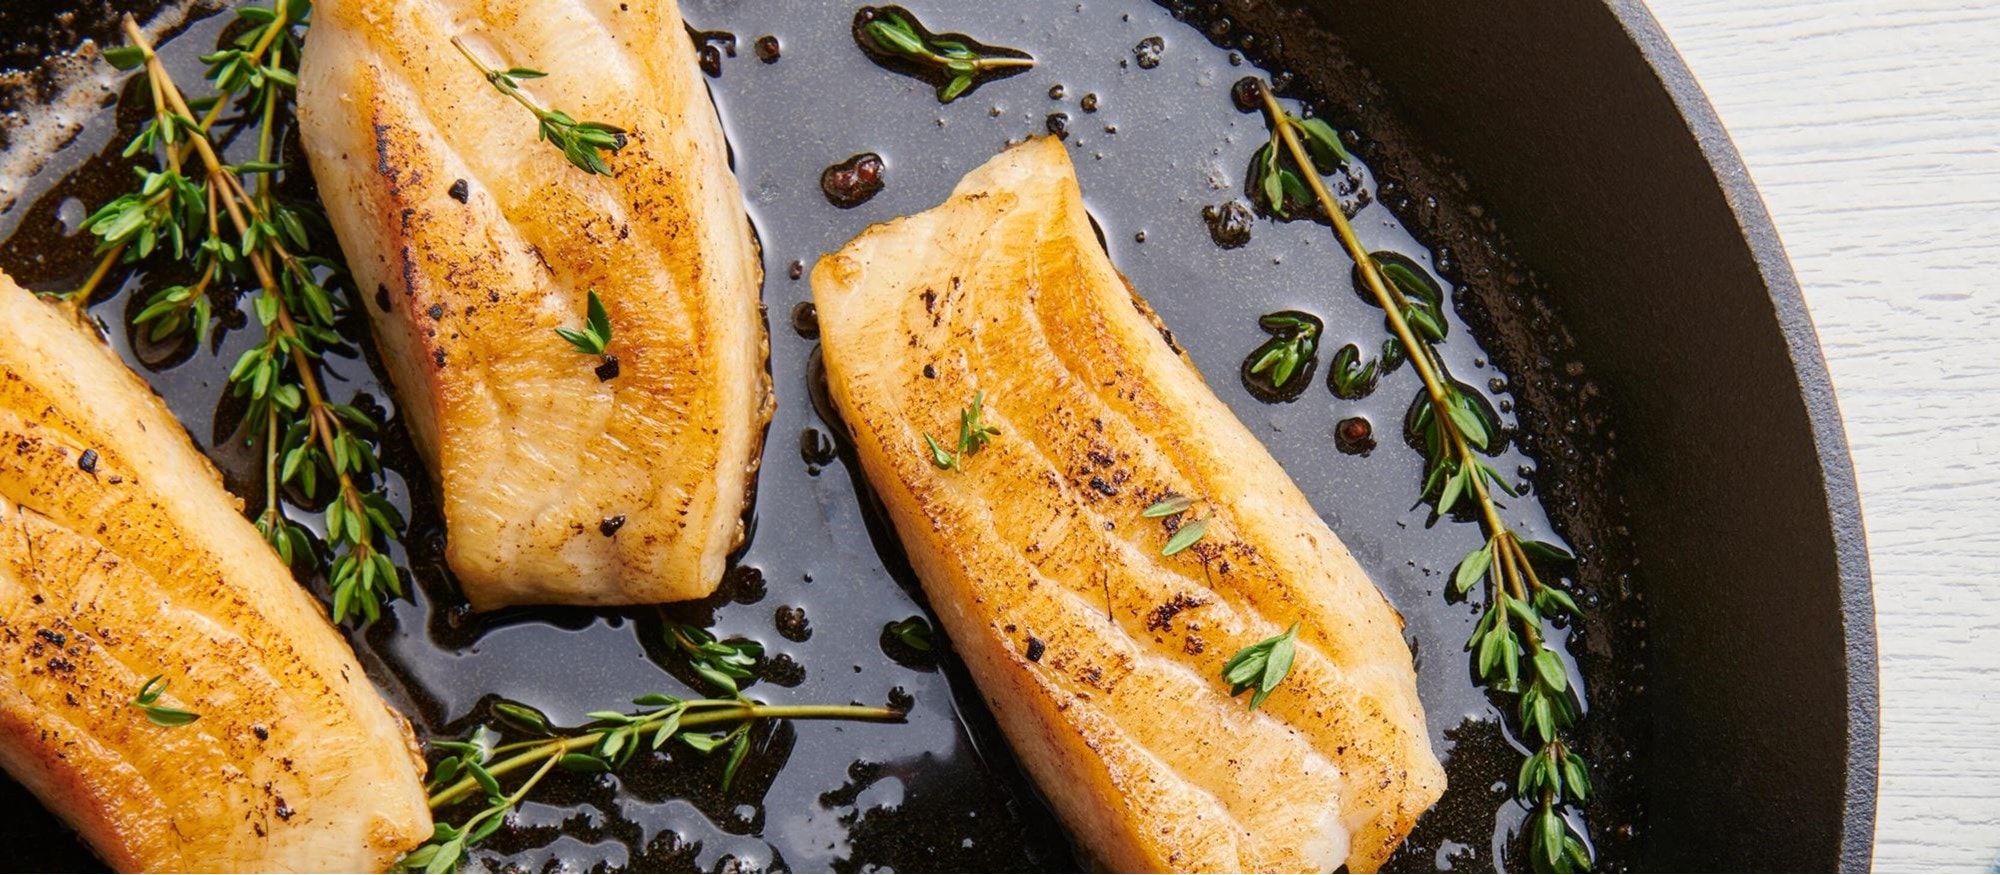 Easy and delicious Sea Bass with Chive-Garlic Compound Butter recipe using the Bake Mode setting of your Wolf Oven